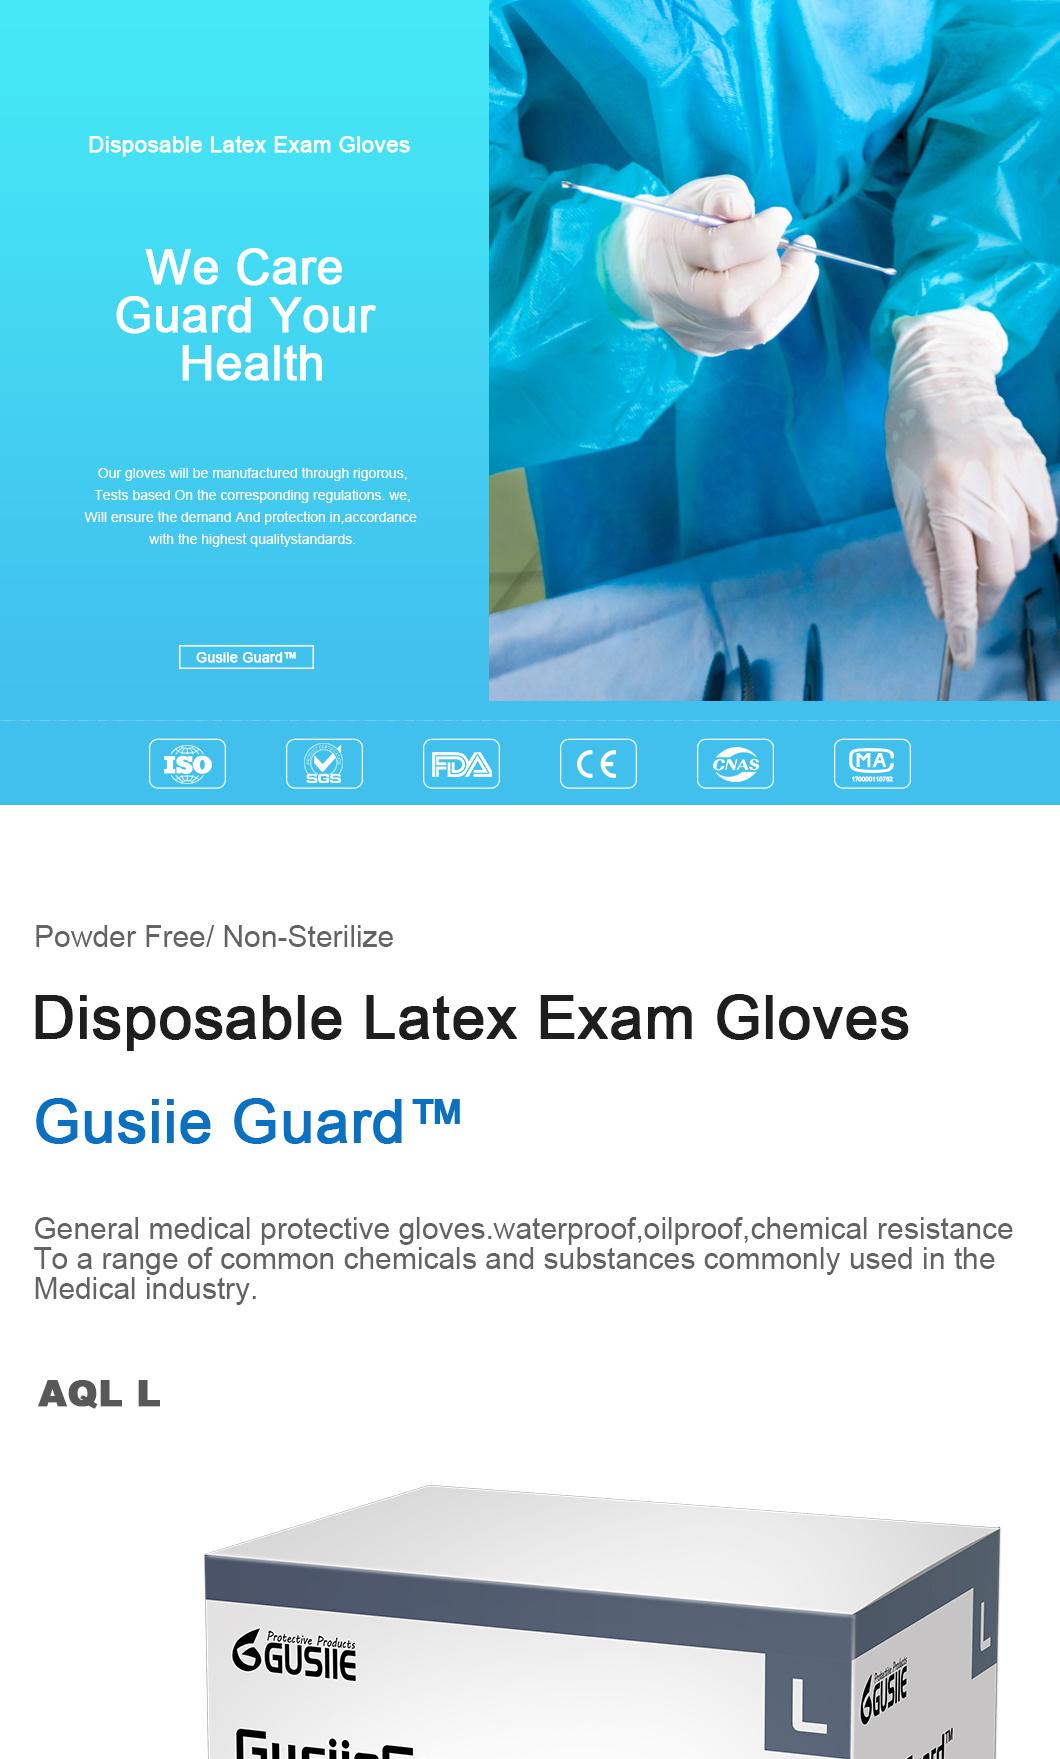 Disposable Powder Free Gloves Multifunction, Disposable Medical Examination Rubber Gloves Disposable Latex Gloves